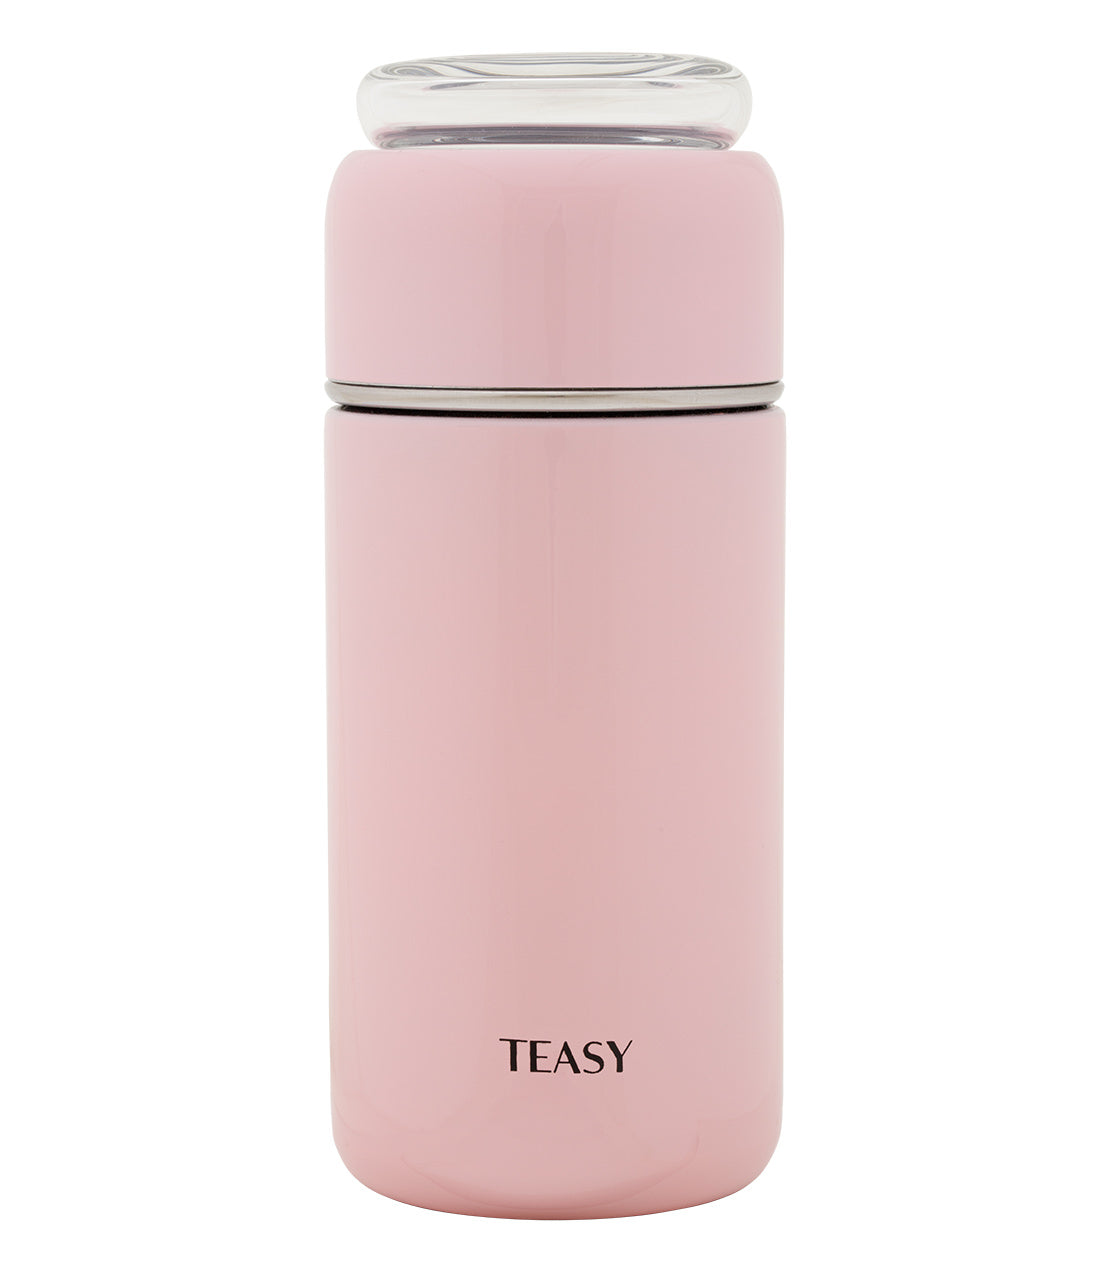 Teasy Insulated Flask (Multiple Colors) - 9 oz. Rose Pink - Harney & Sons Fine Teas